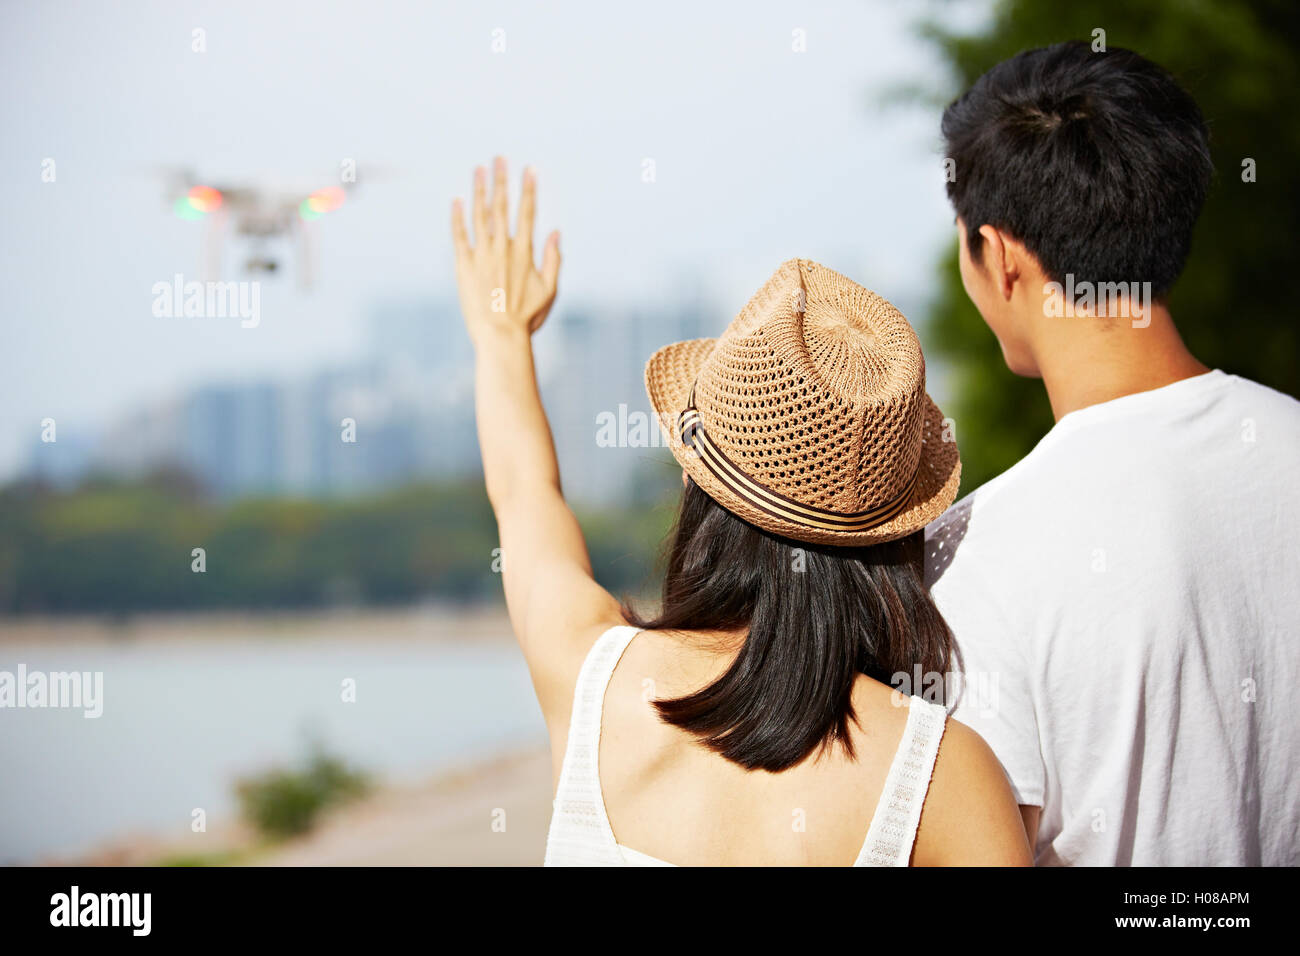 young asian woman waving to a flying drone operated by her friend or partner Stock Photo